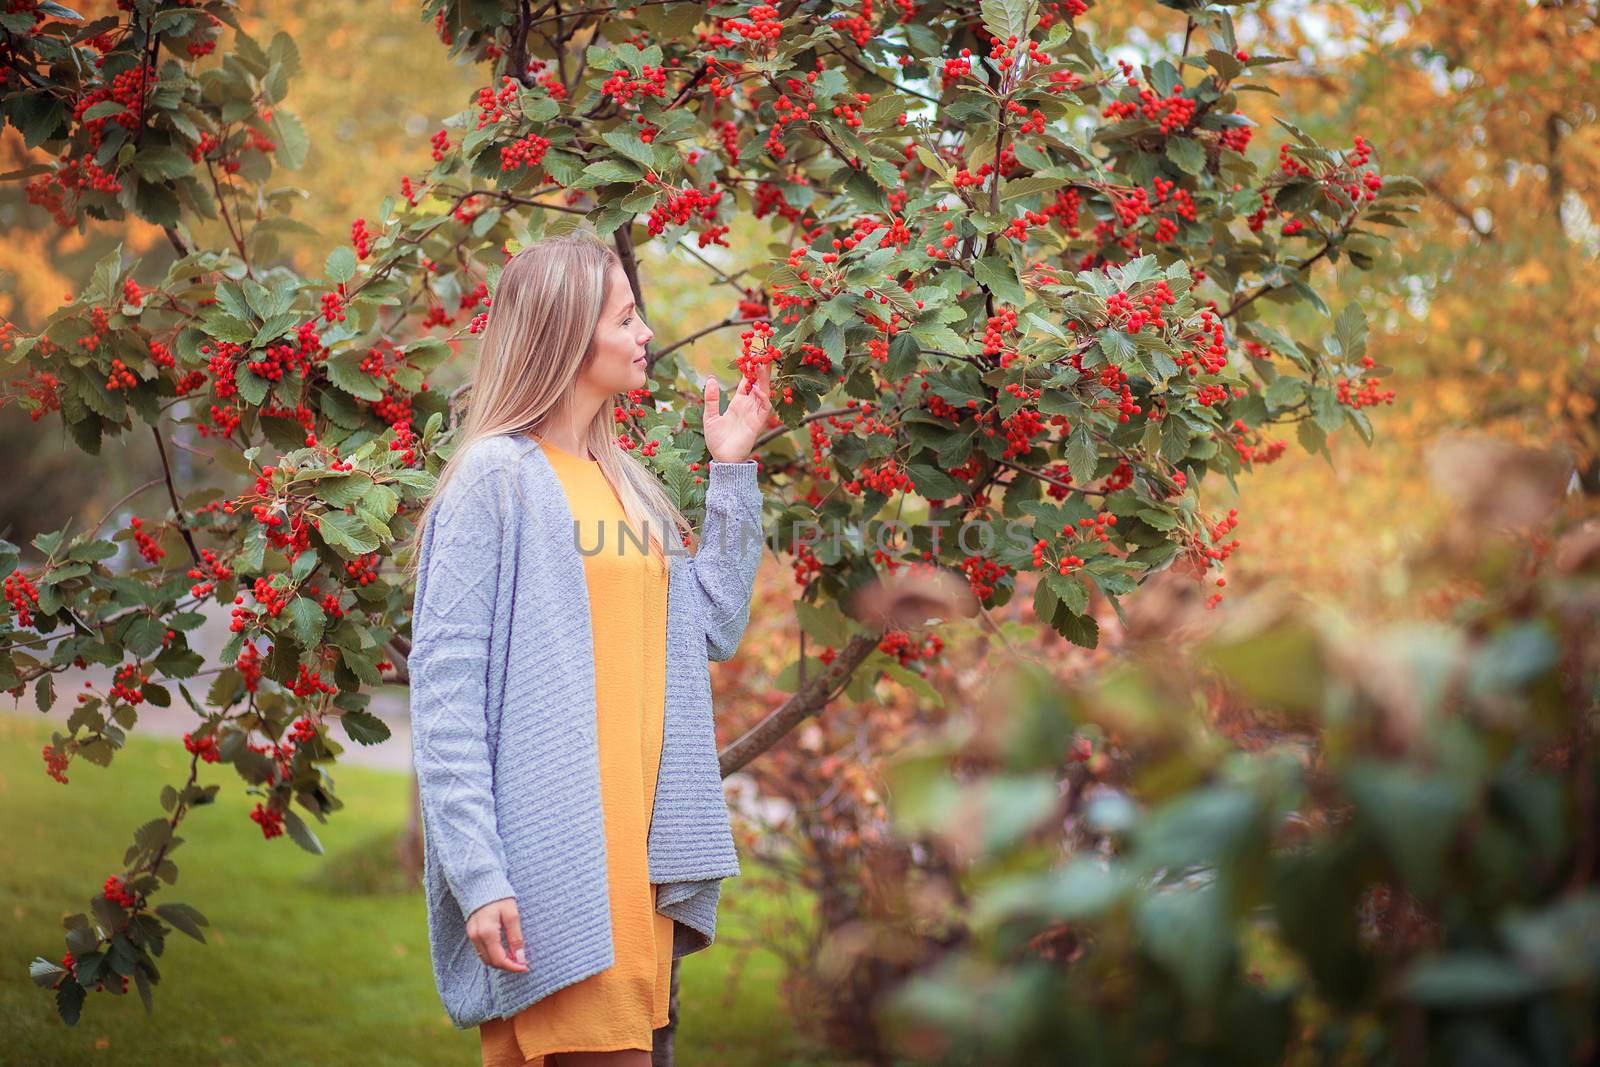 A young blonde girl in a gray knitted sweater walks in the autumn park and looks at red berries